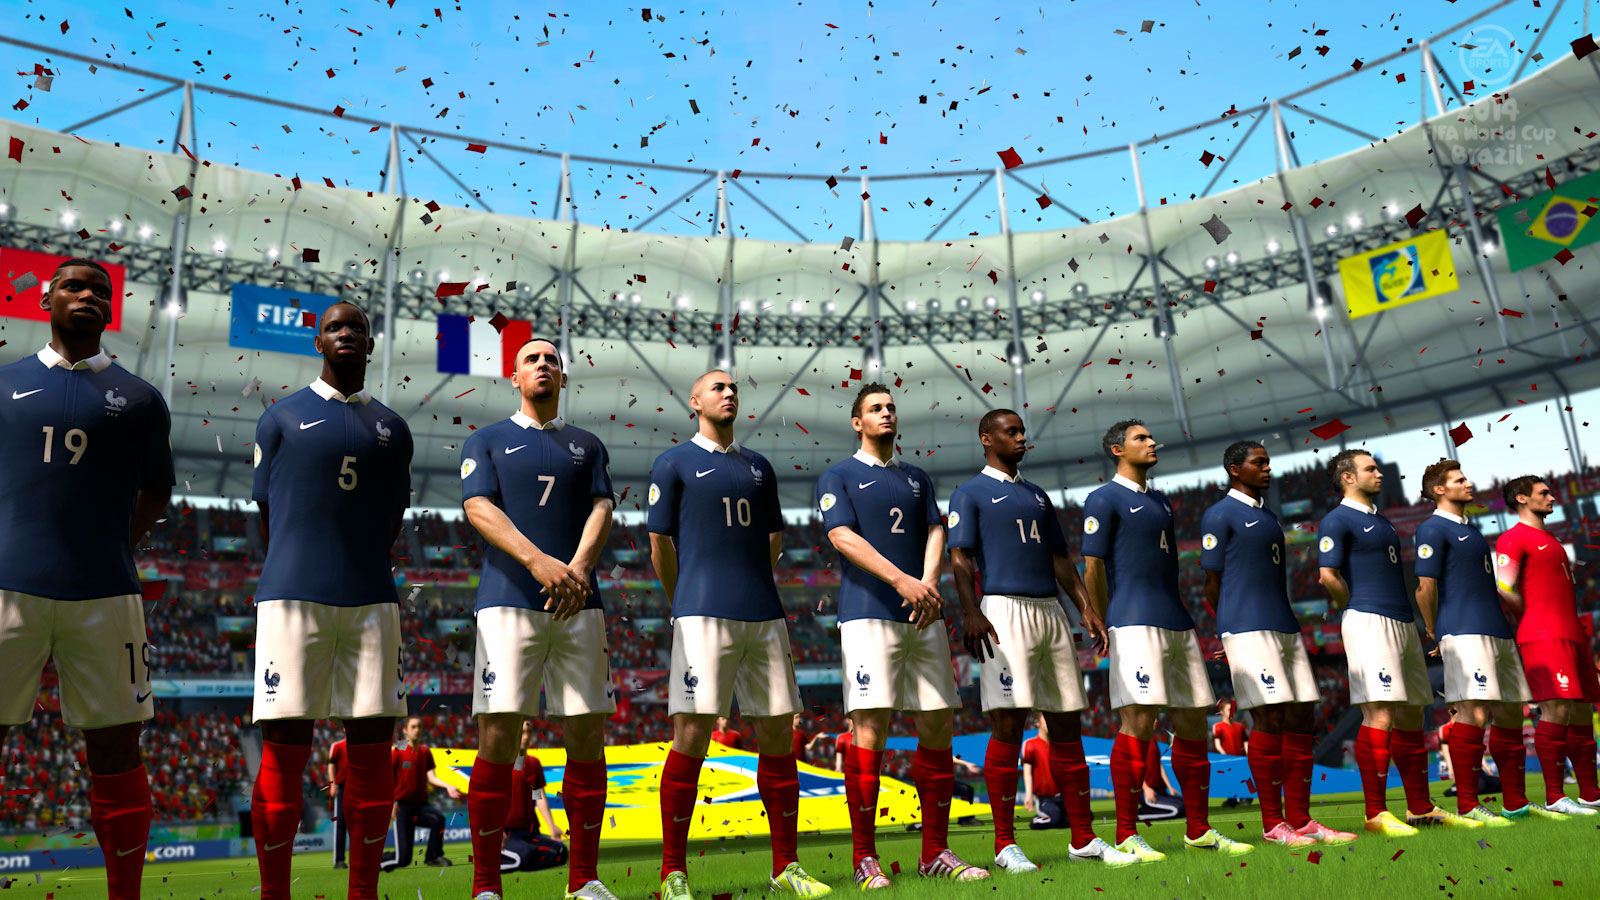 Xbox One, PS4, PC not getting FIFA World Cup devs explain why [UPDATE] - GameSpot